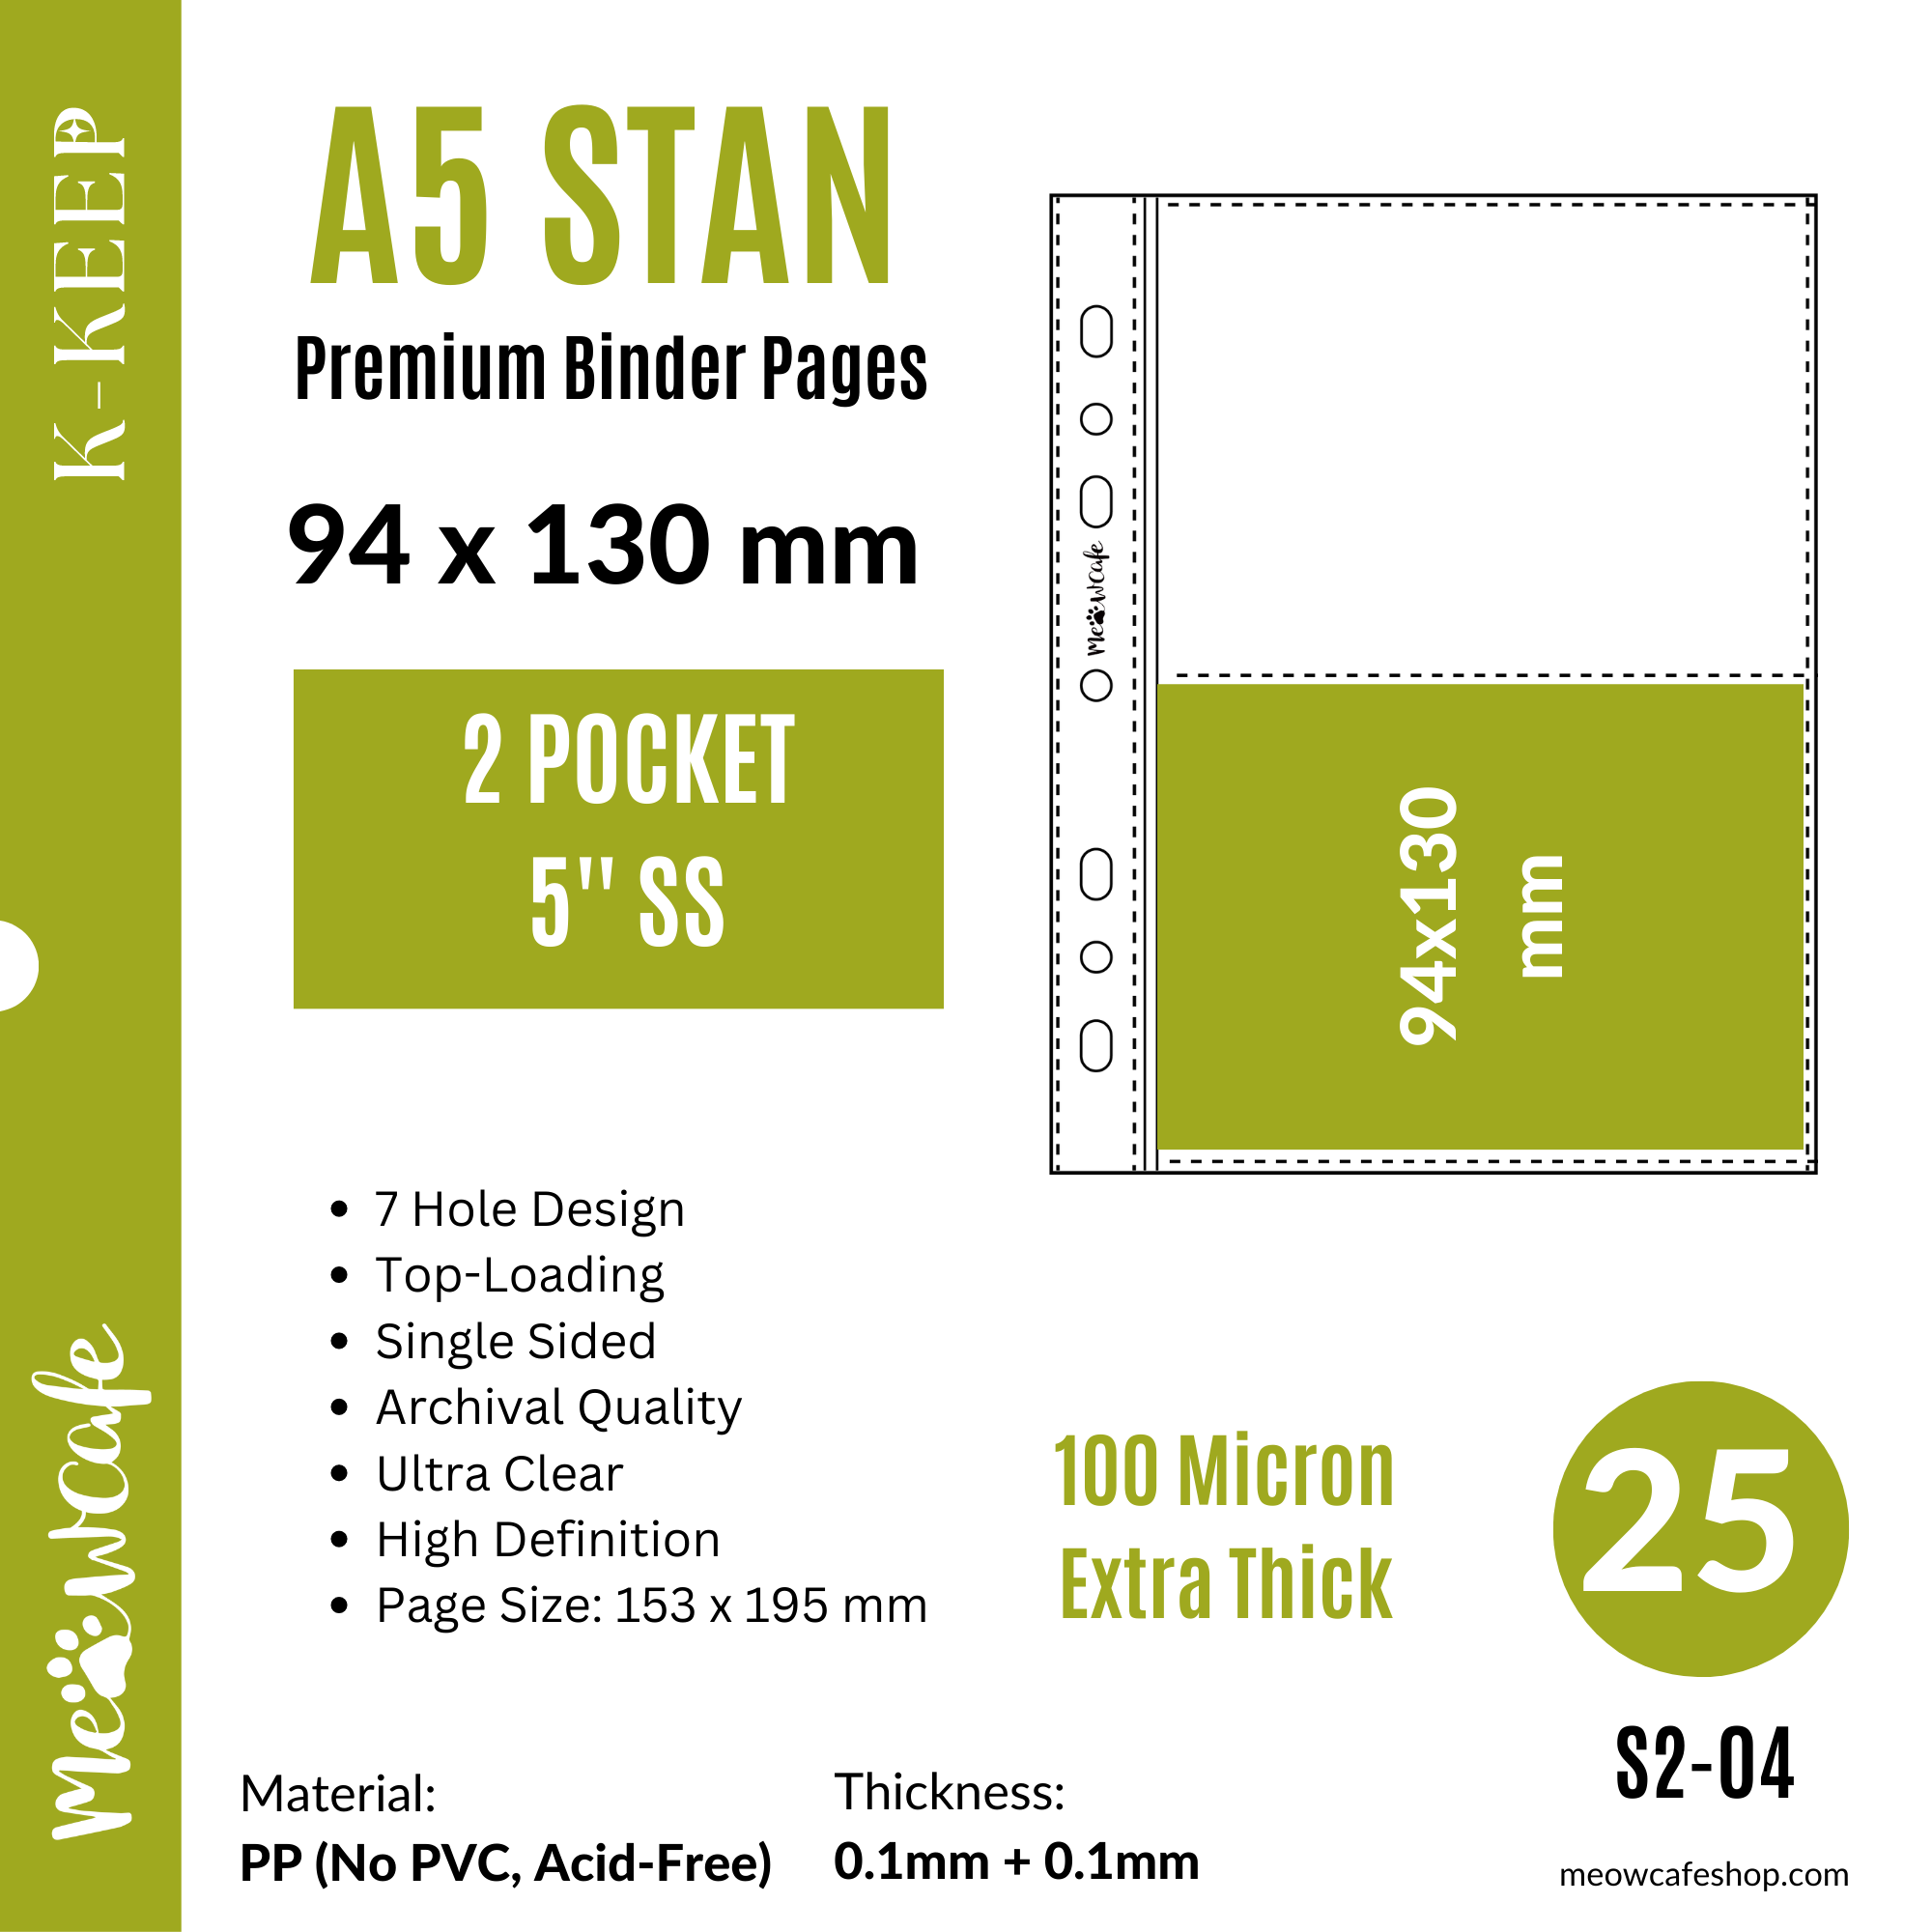 K-KEEP [A5 Standard] - 2 Pocket 5 inch (94x130mm)  - 7 Holes Premium Binder Pages, 100 Micron Thick, High Definition (Pack of 25) - S2-04